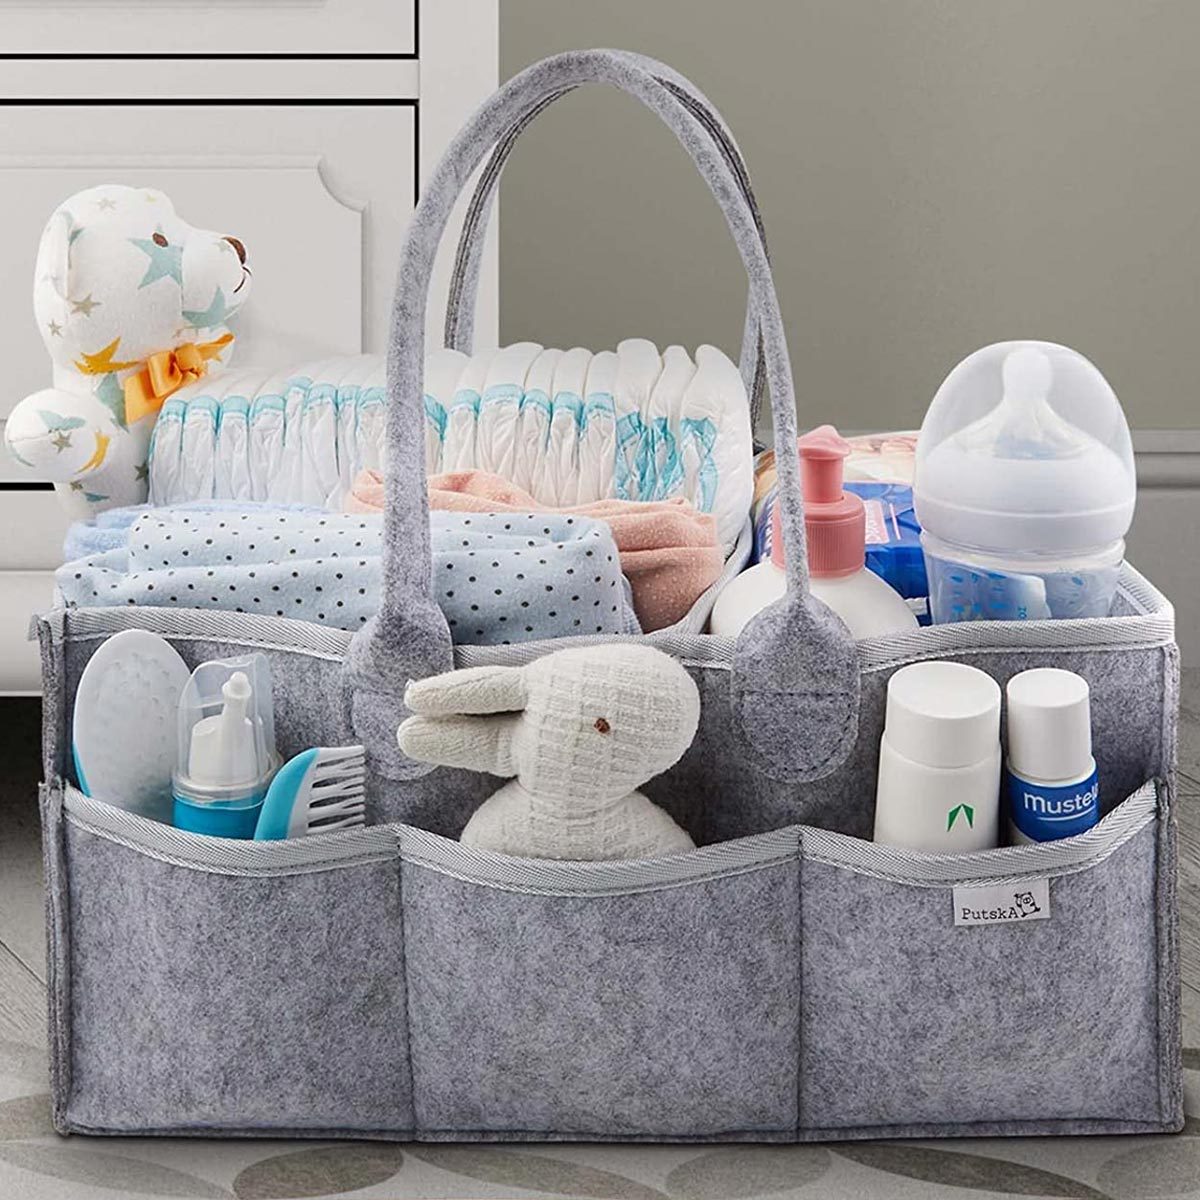 The Best Baby Shower Gifts for Moms